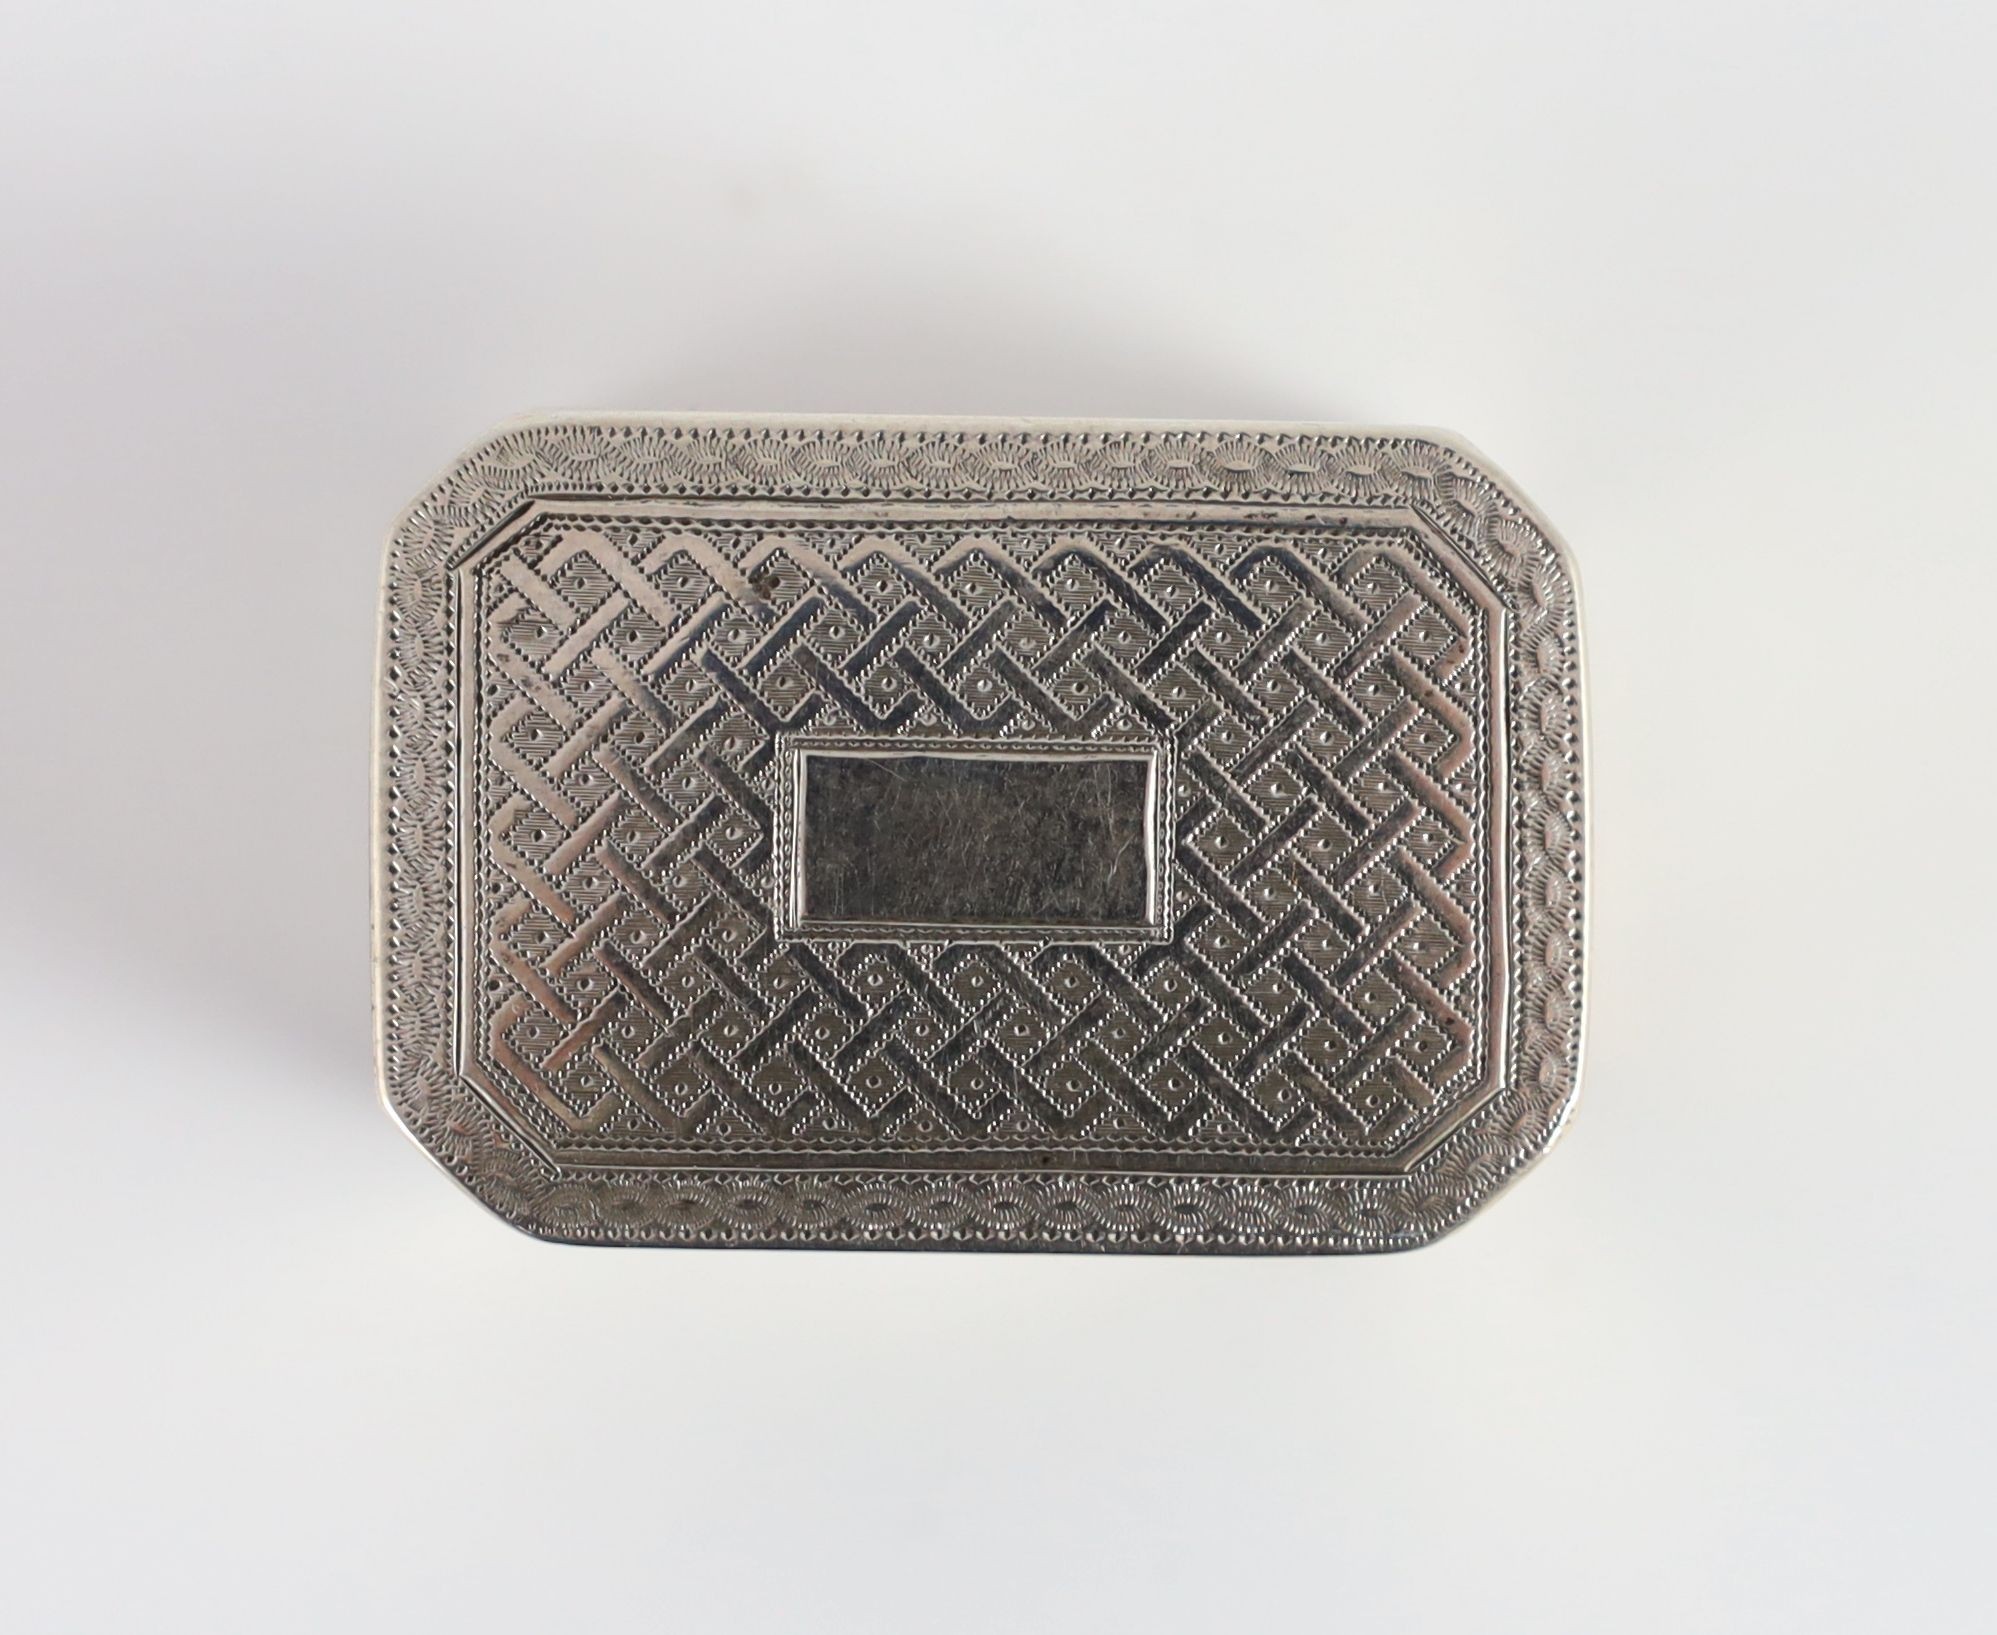 A George III silver octagonal nutmeg grater, by Joseph Wilmore